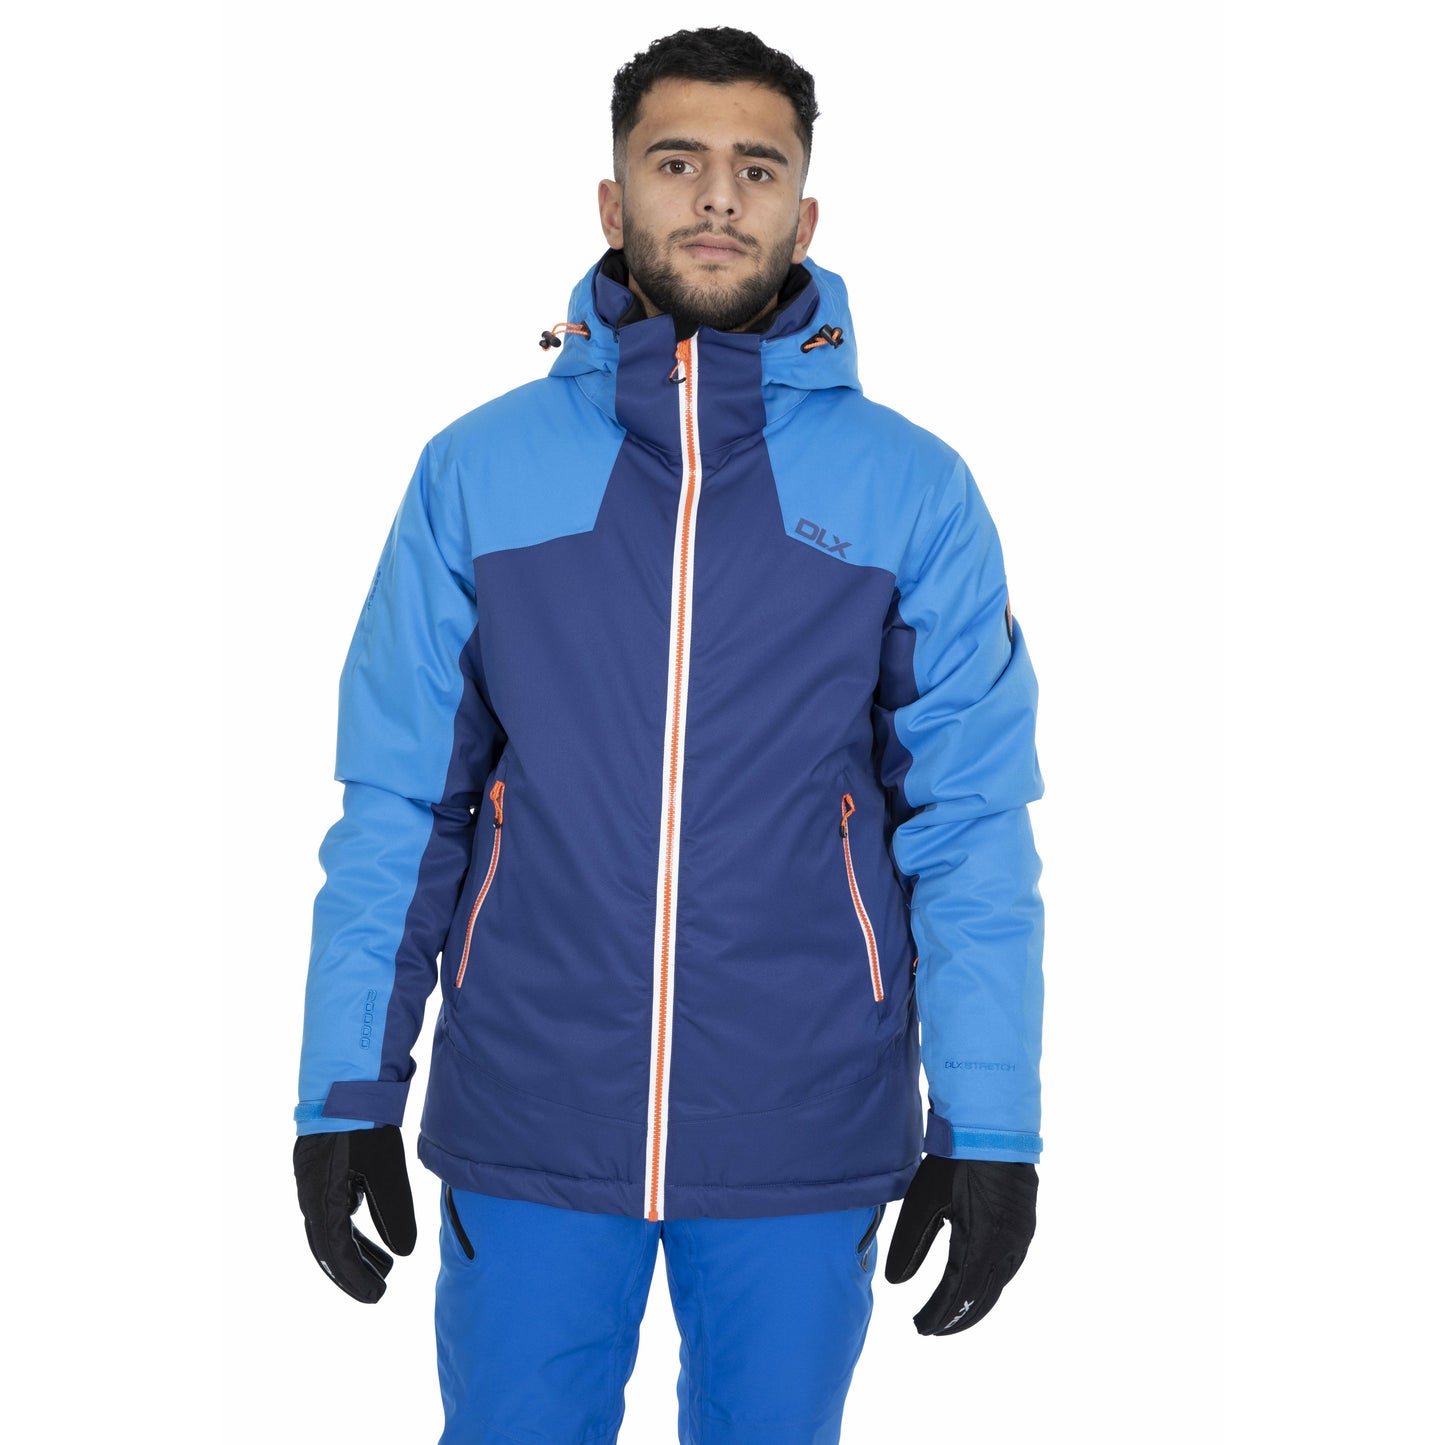 Coulson Men's DLX Padded Waterproof Ski Jacket with Recco in Twilight